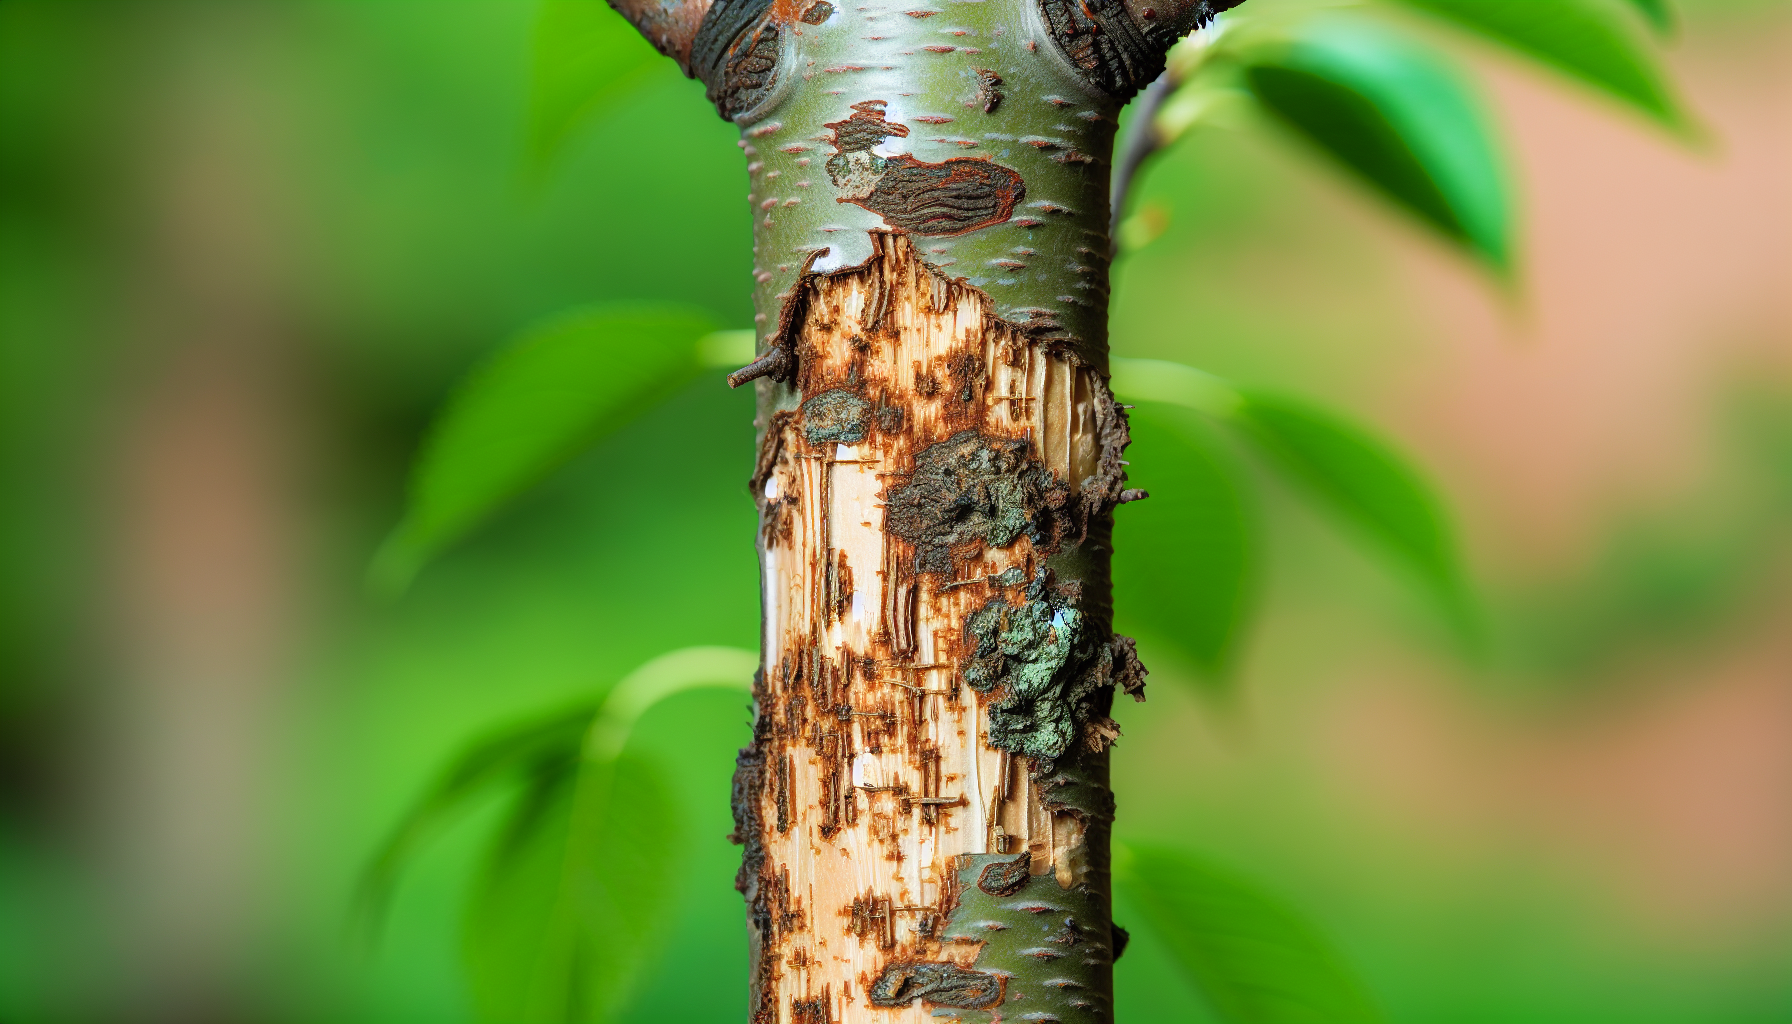 A close-up photo of a vertical tree limb with visible signs of decay and disease